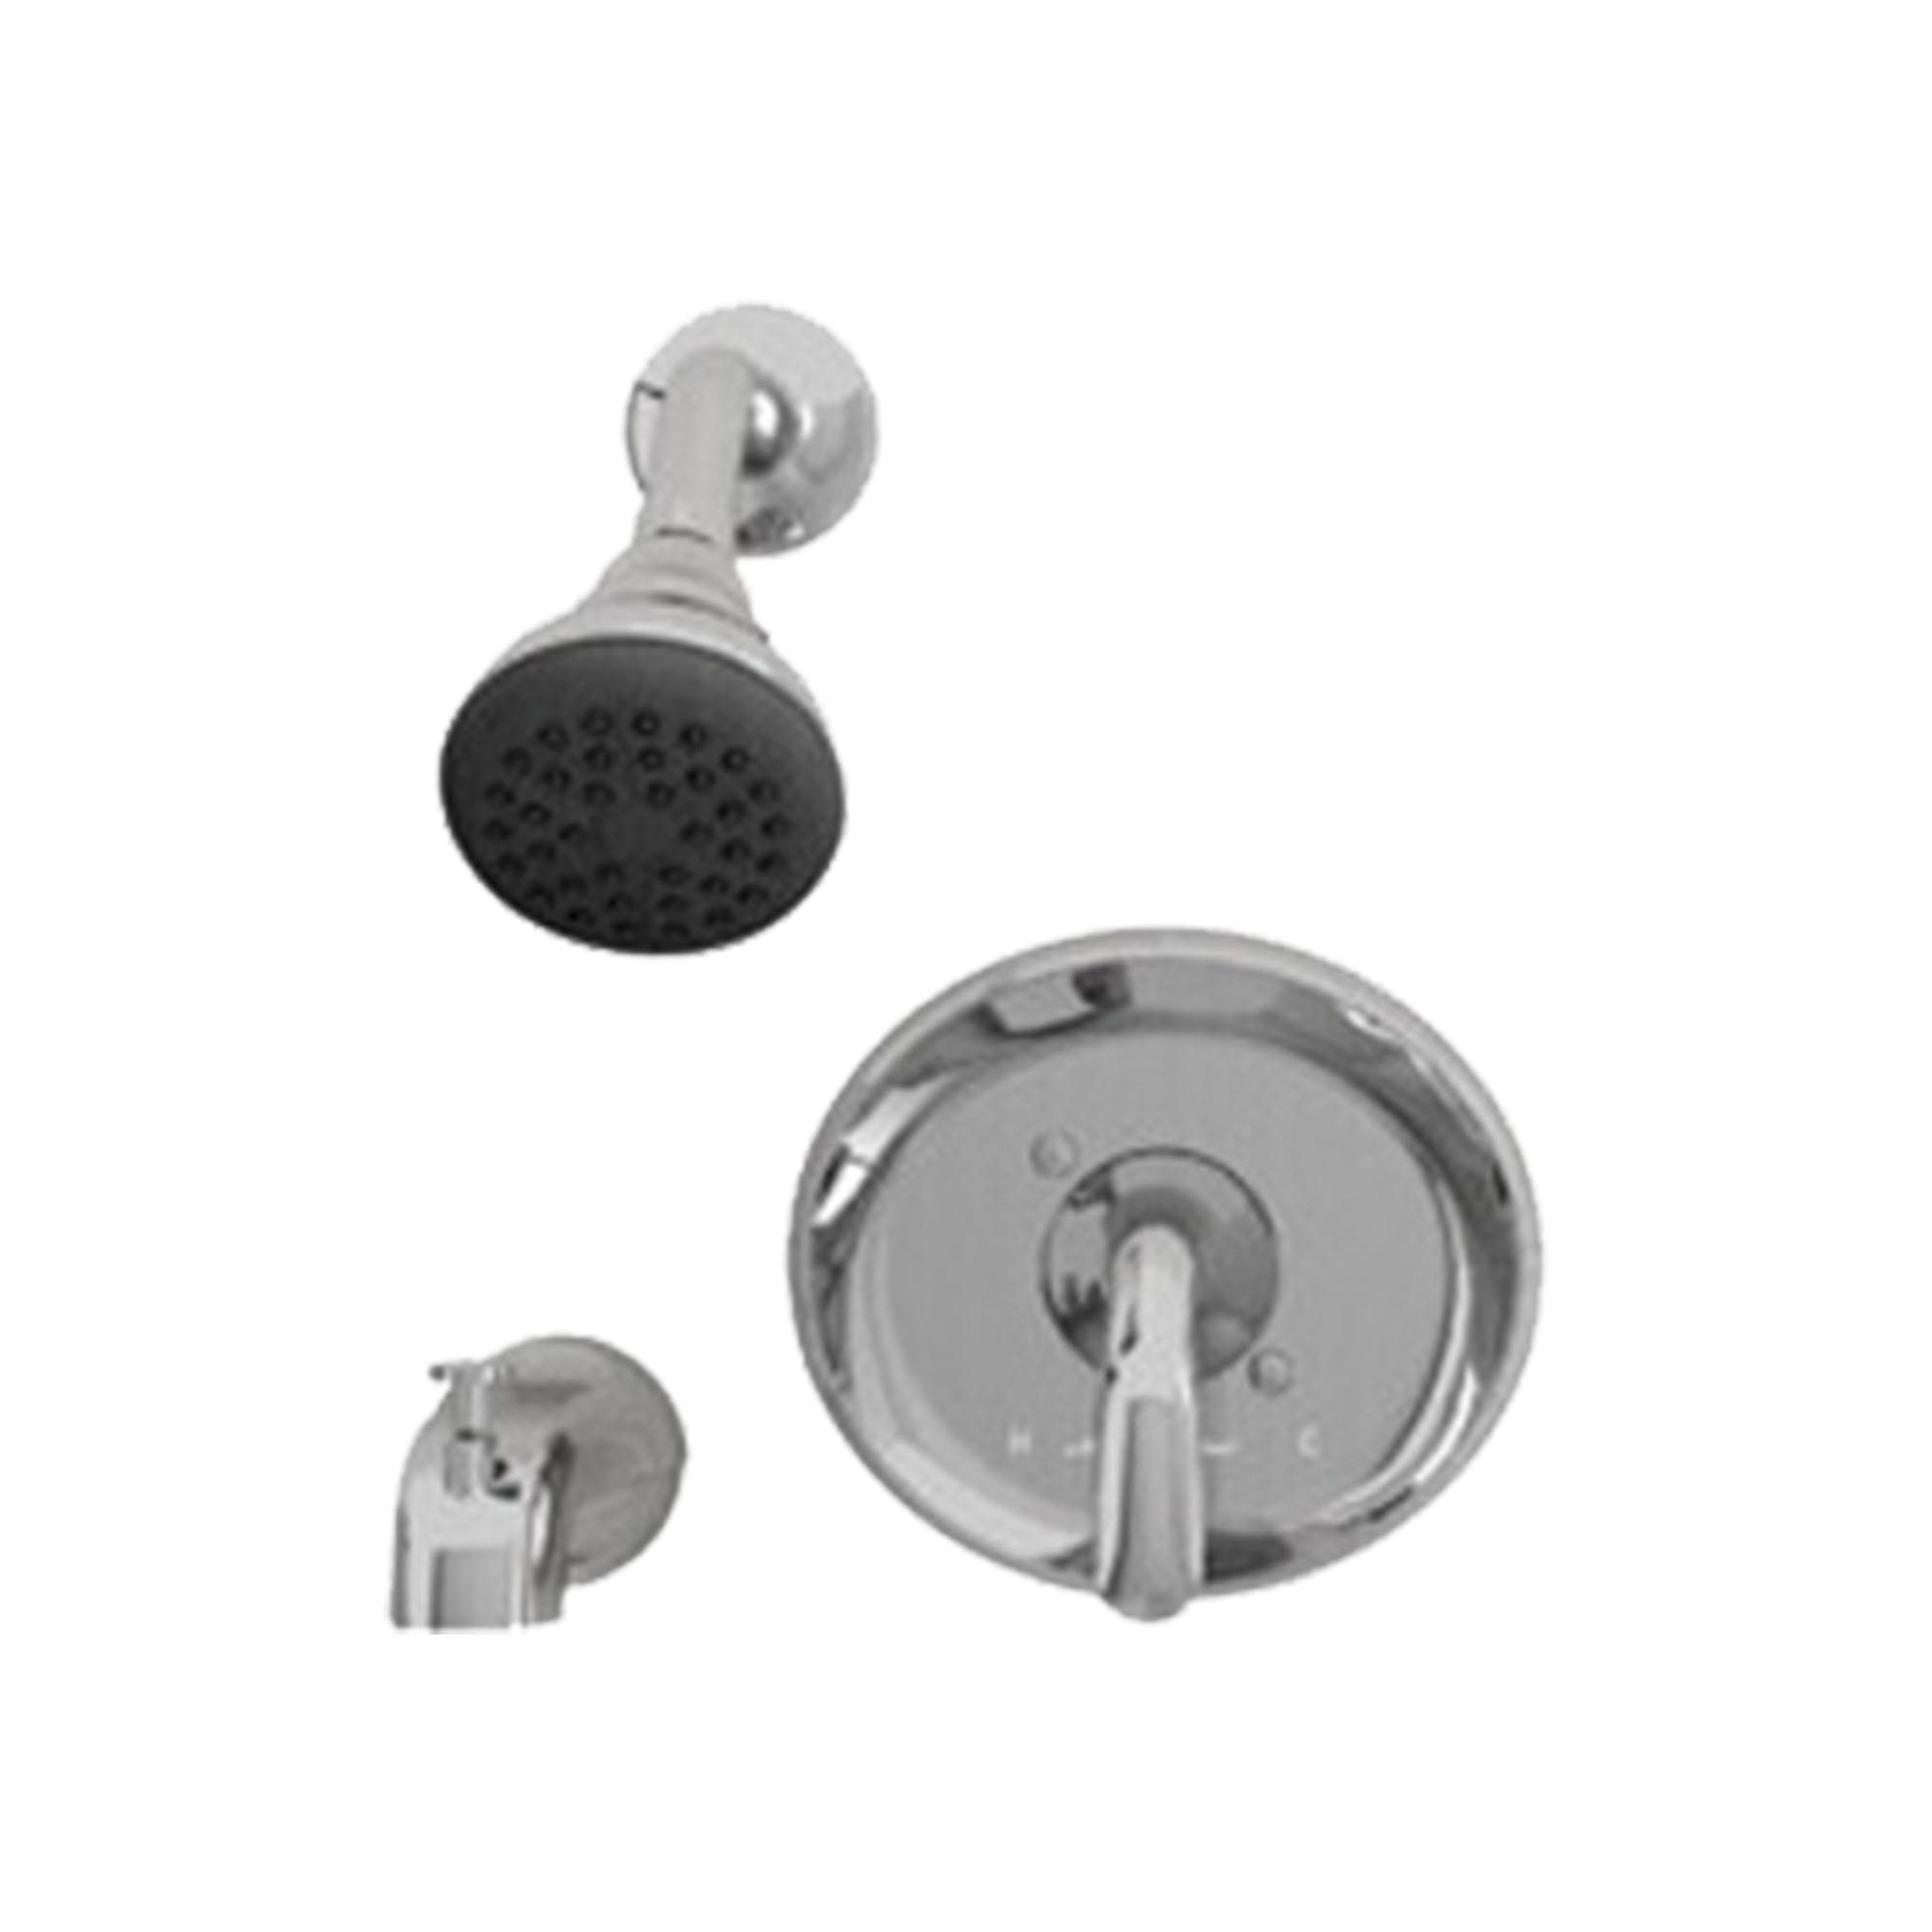 Cadet 2.0 GPM Tub and Shower Trim Kit with Ceramic Disc Valve Cartridge and Lever Handle